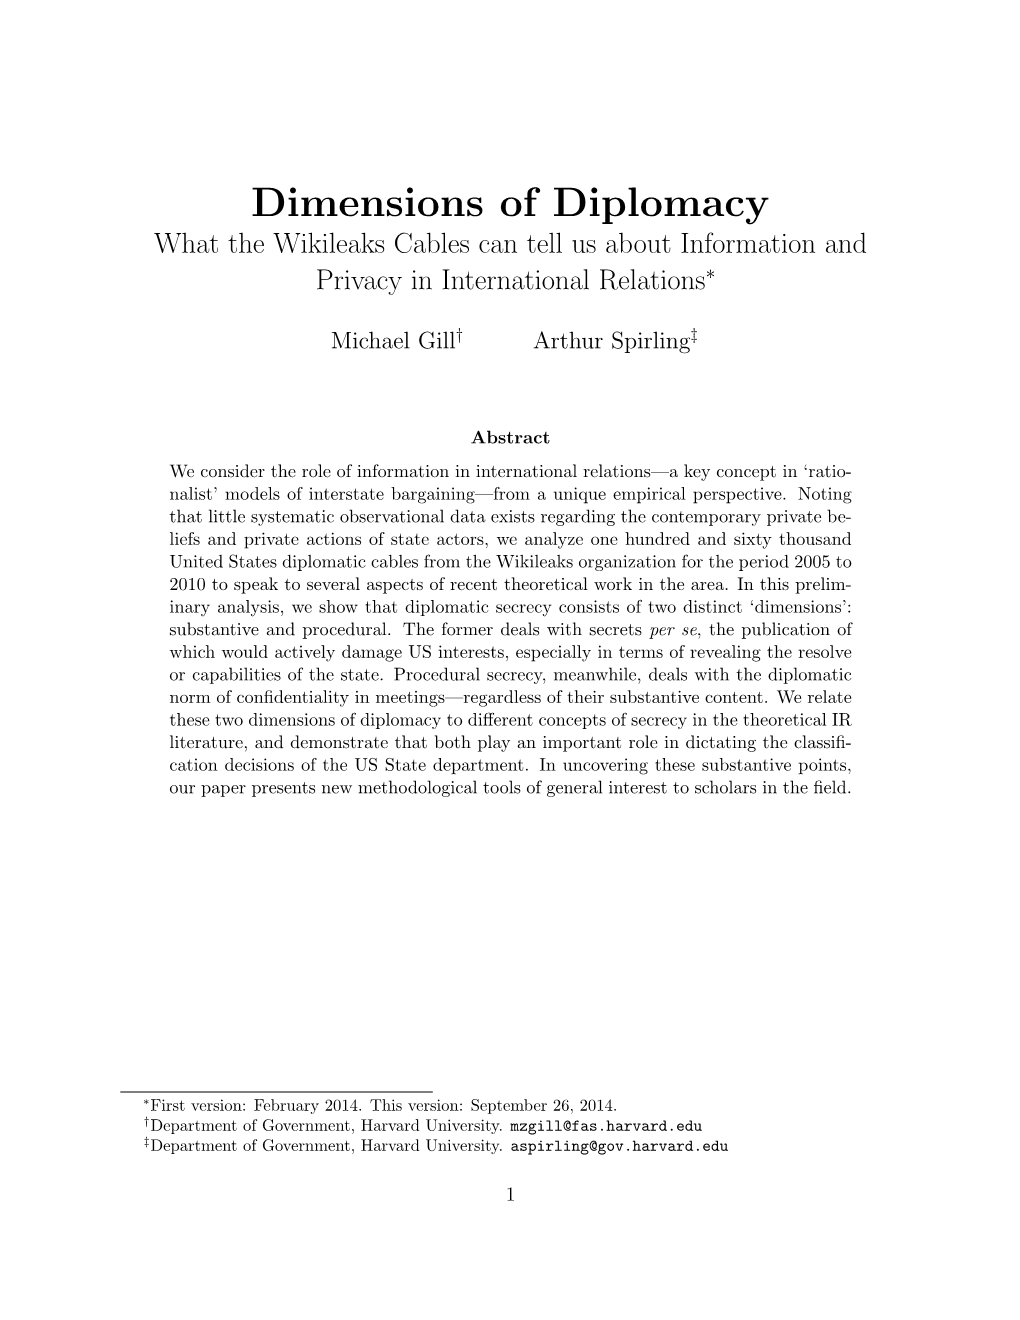 Dimensions of Diplomacy: What The